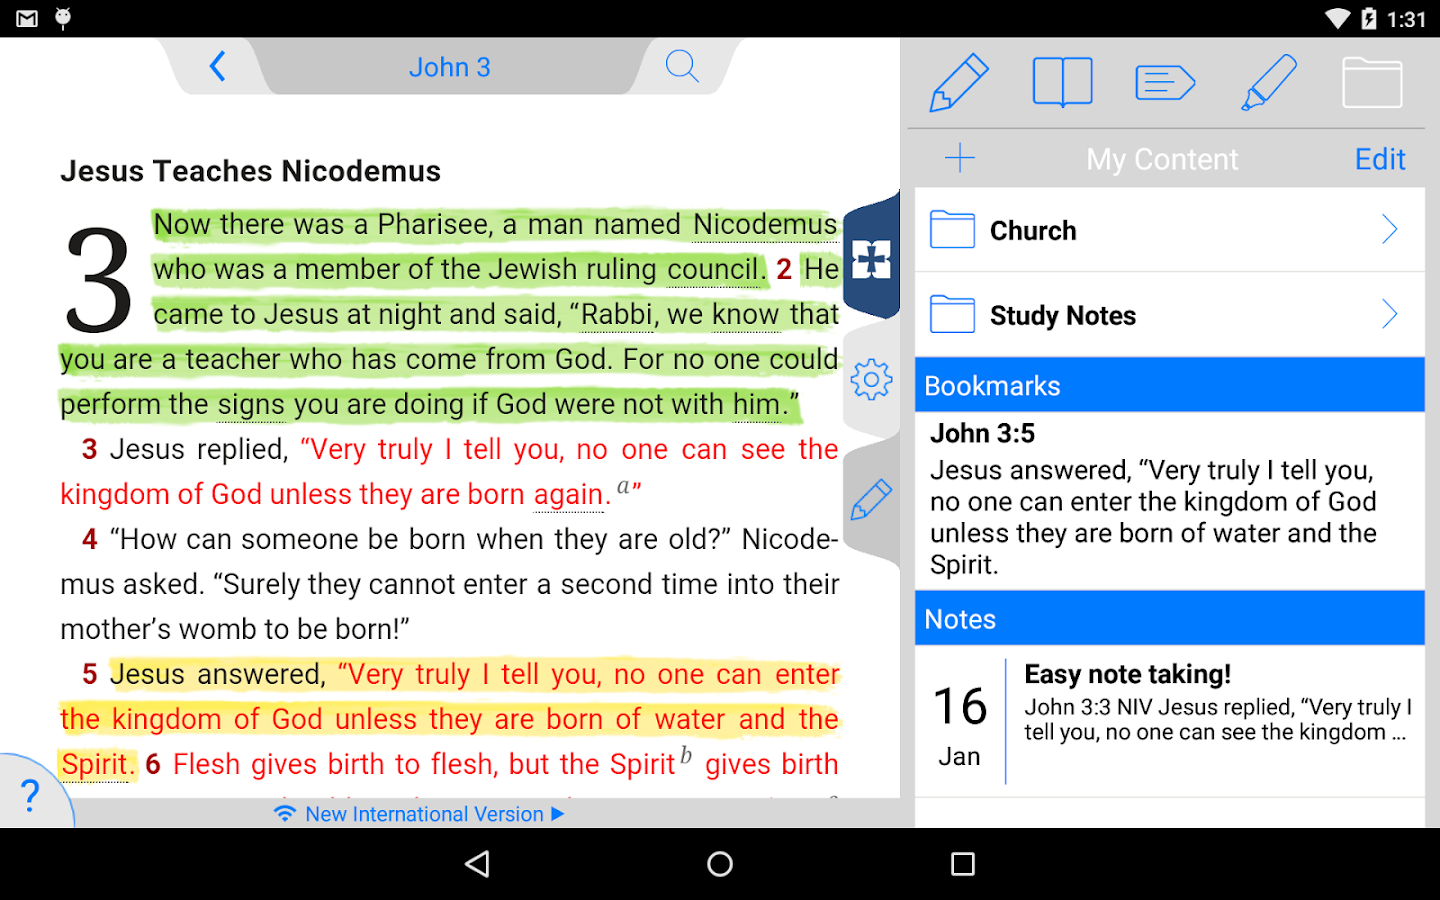 NIV 50th Anniversary Bible 7.8 Android APK Free Download 